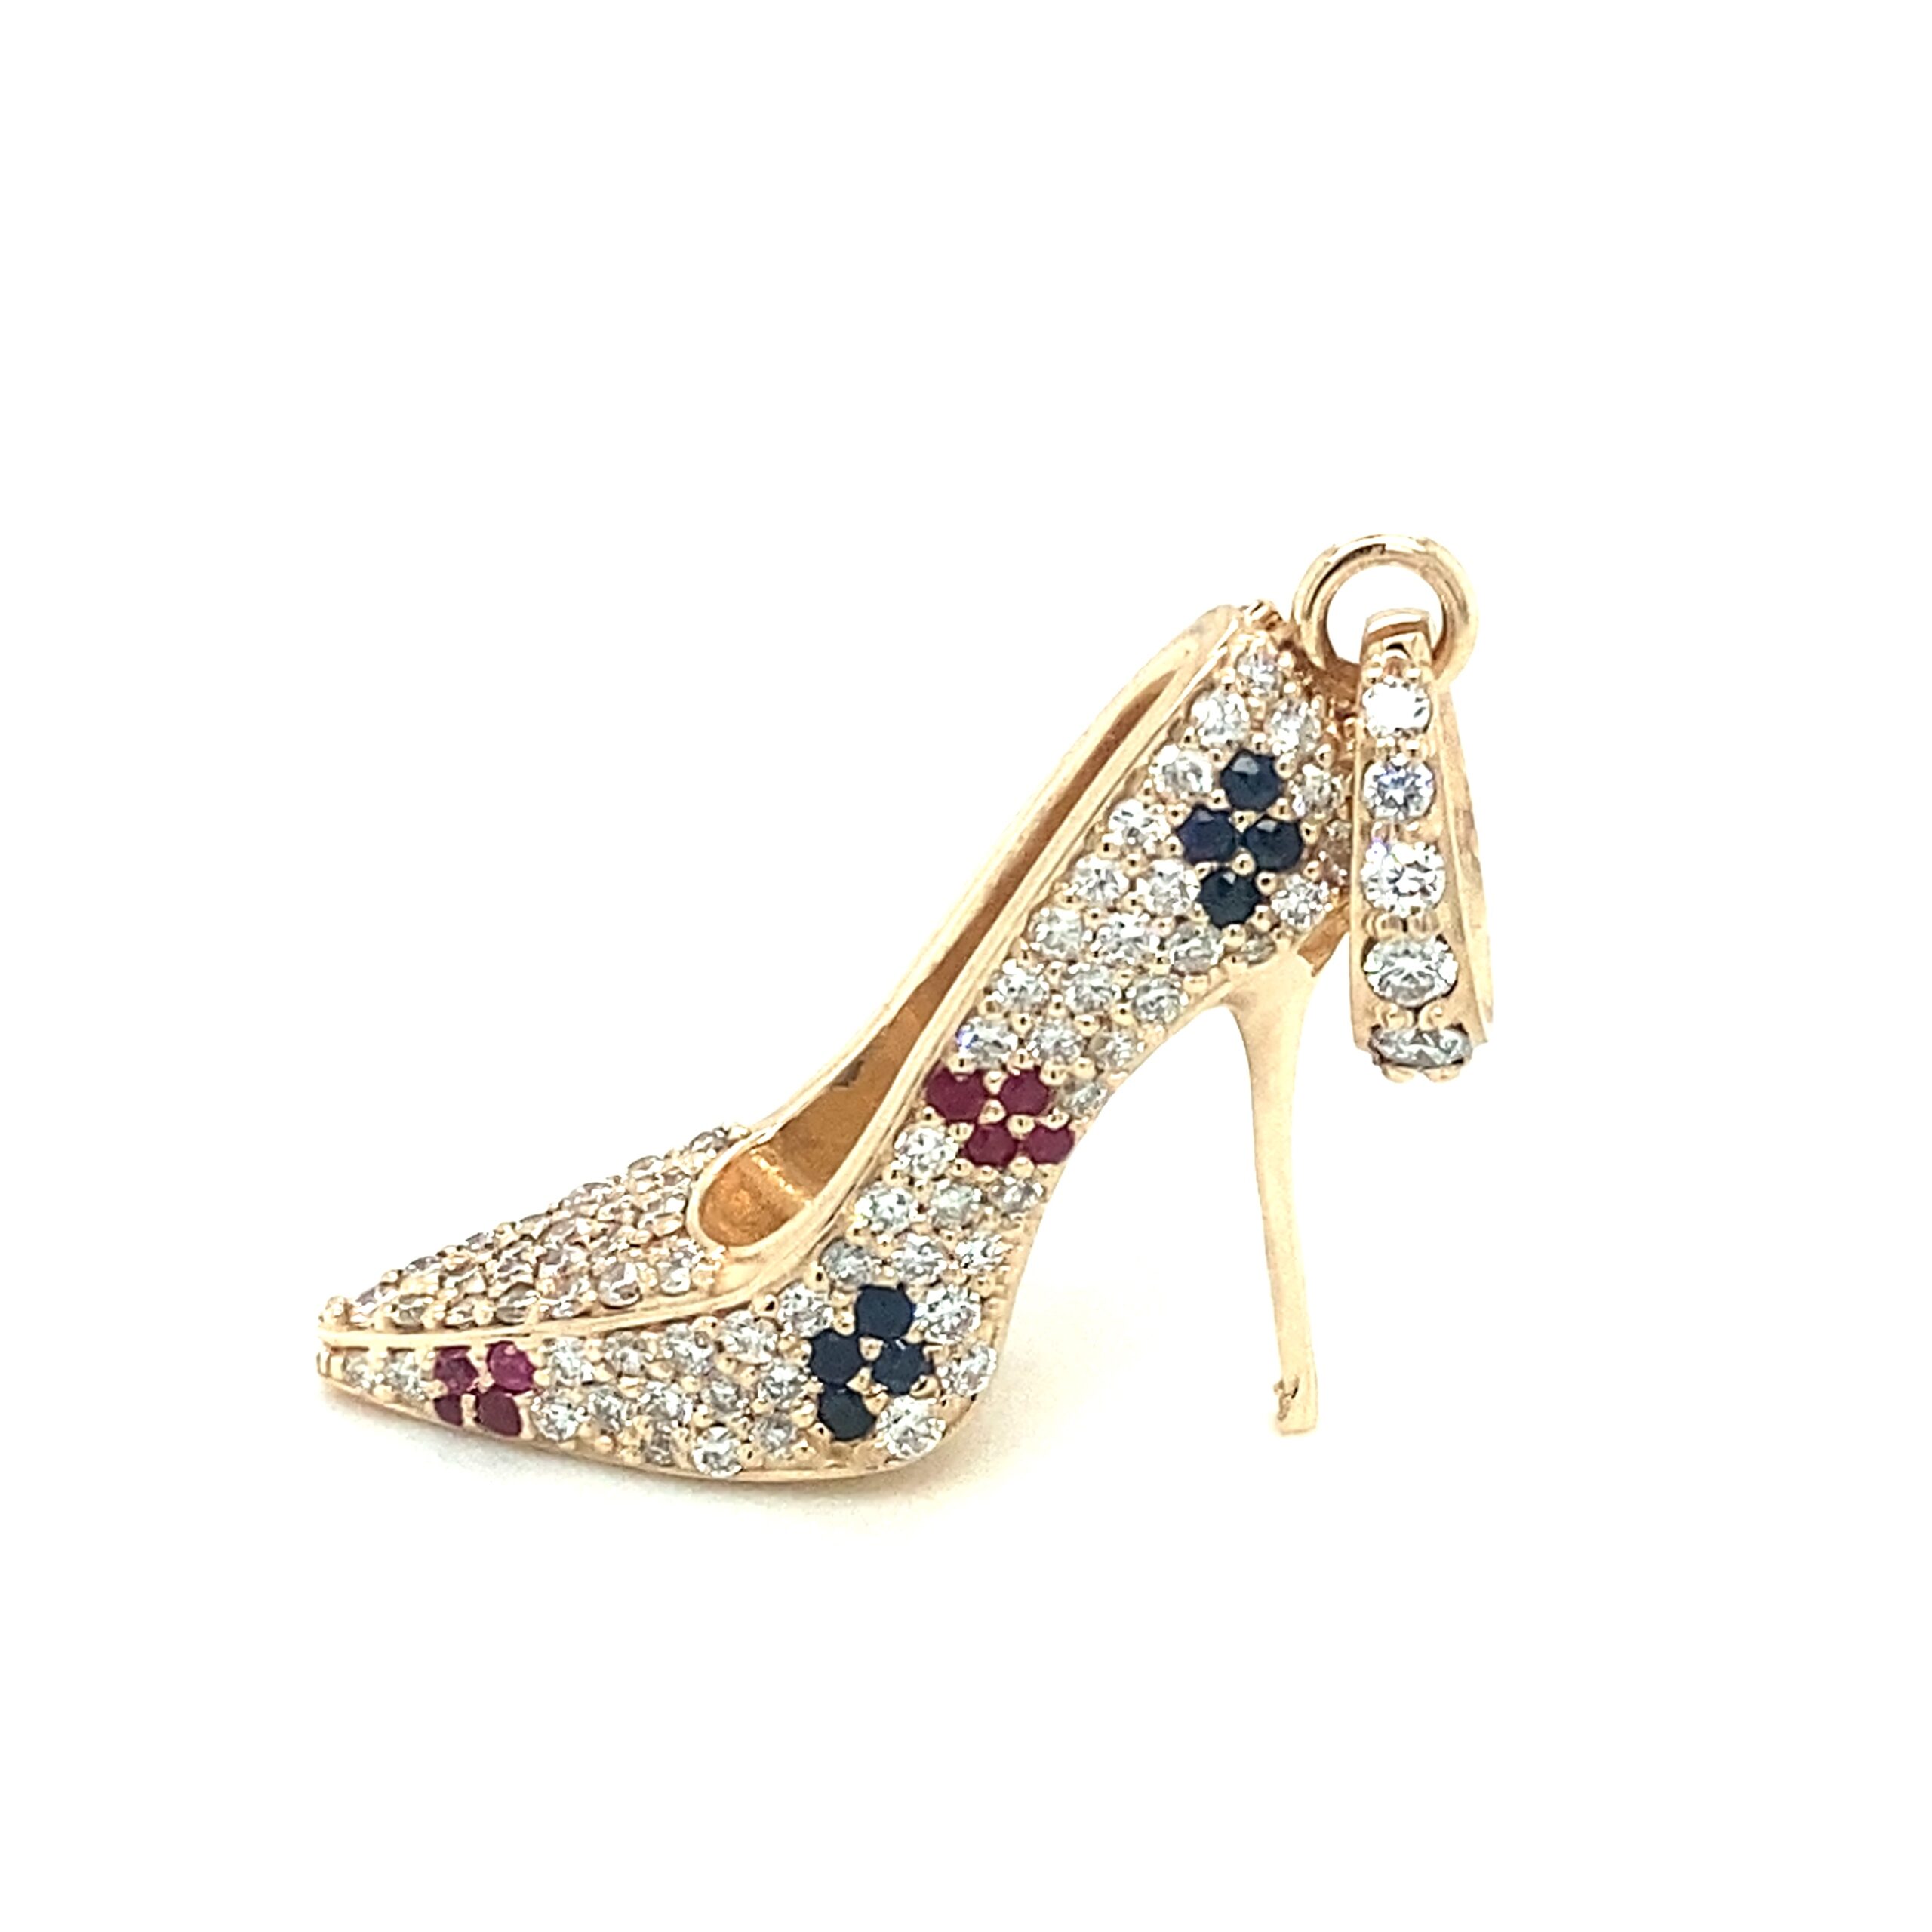 diamond and gemstone pendant in the shape of a high heel shoe